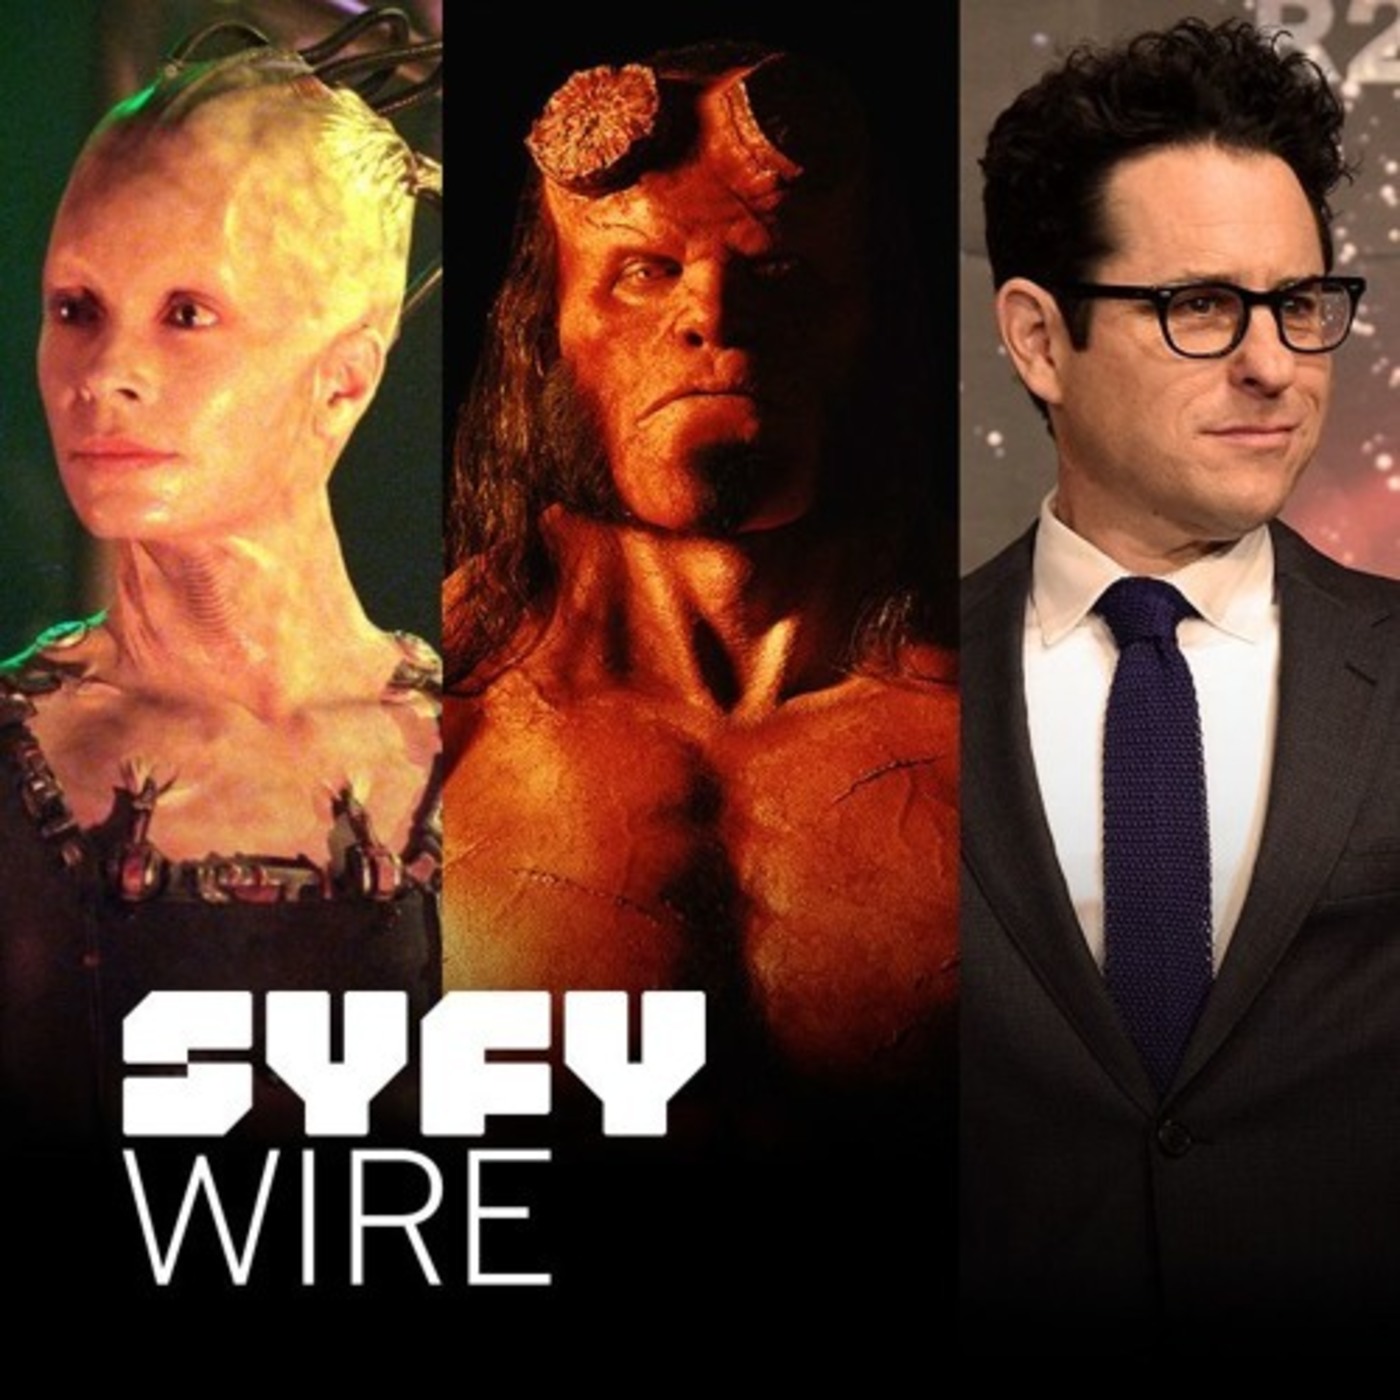 Who Won the Week Episode 93: JJ's back on Star Wars, Hellboy appears, everyone loves the Borg by Syfy Wire